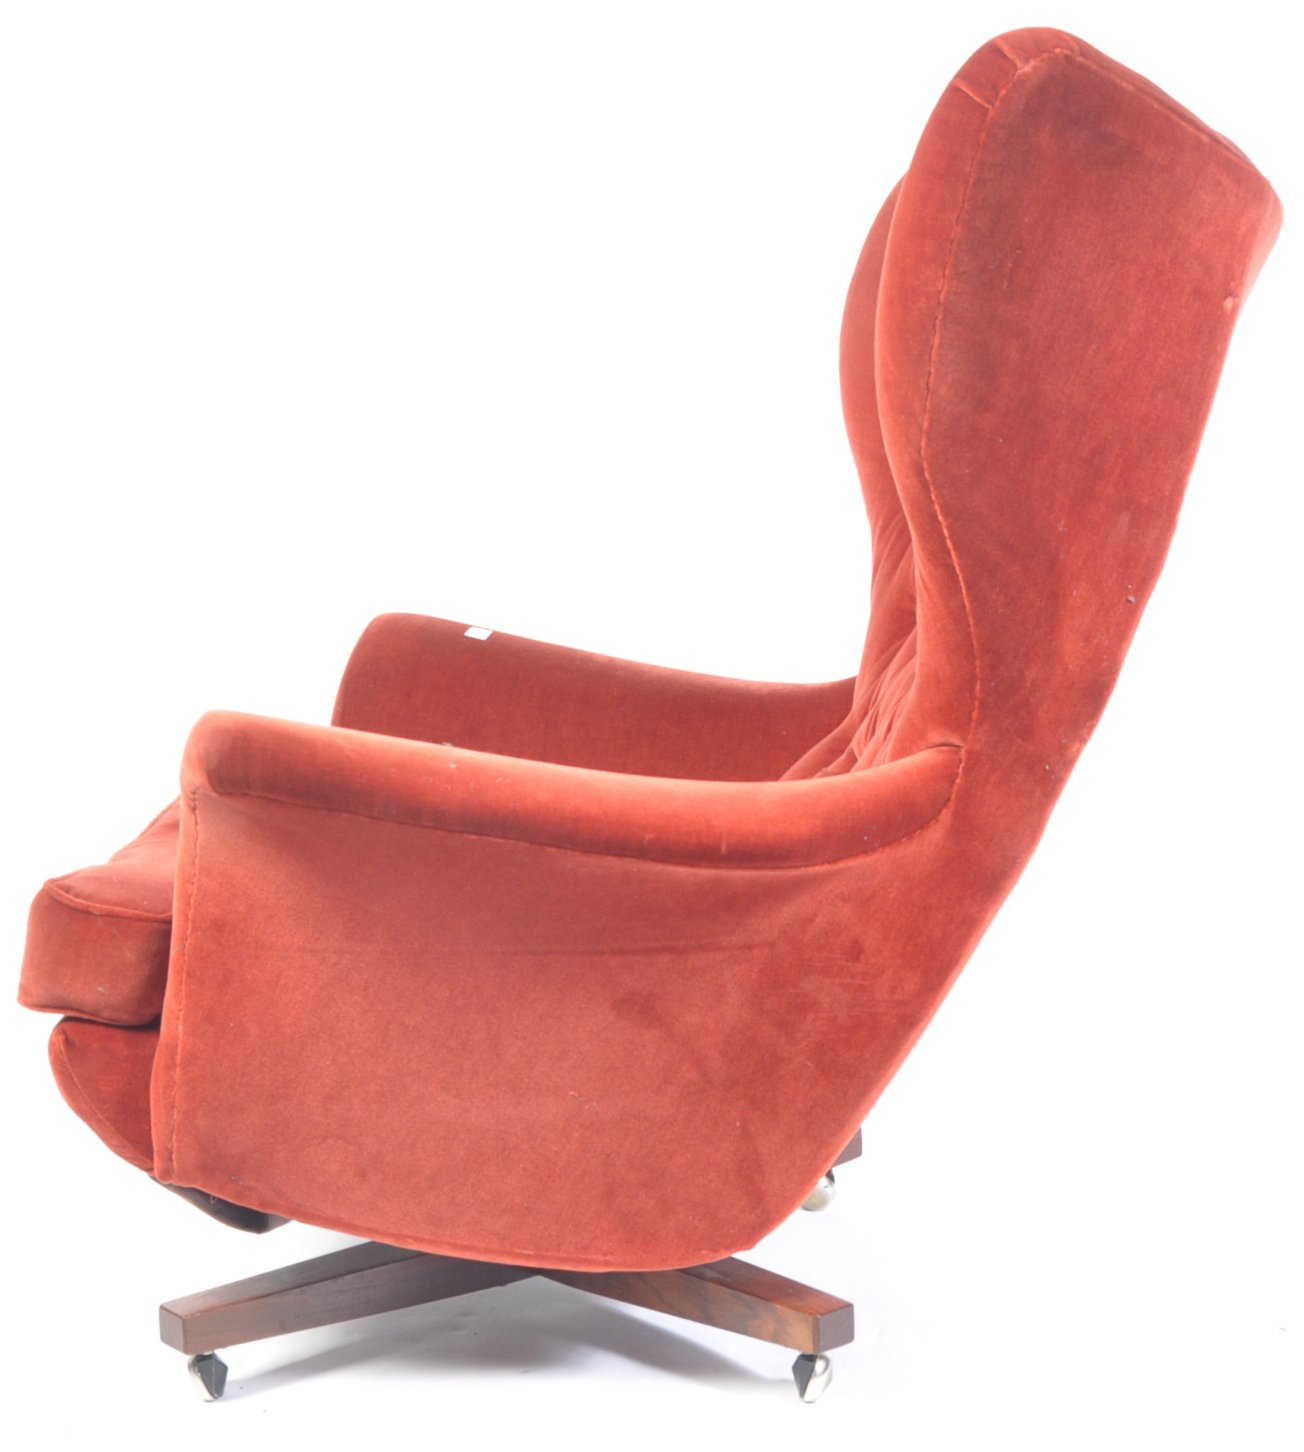 G-PLAN 1960'S BLOFELD MODEL 6250 EASY ARMCHAIR BY PAUL CONTI - Image 4 of 5